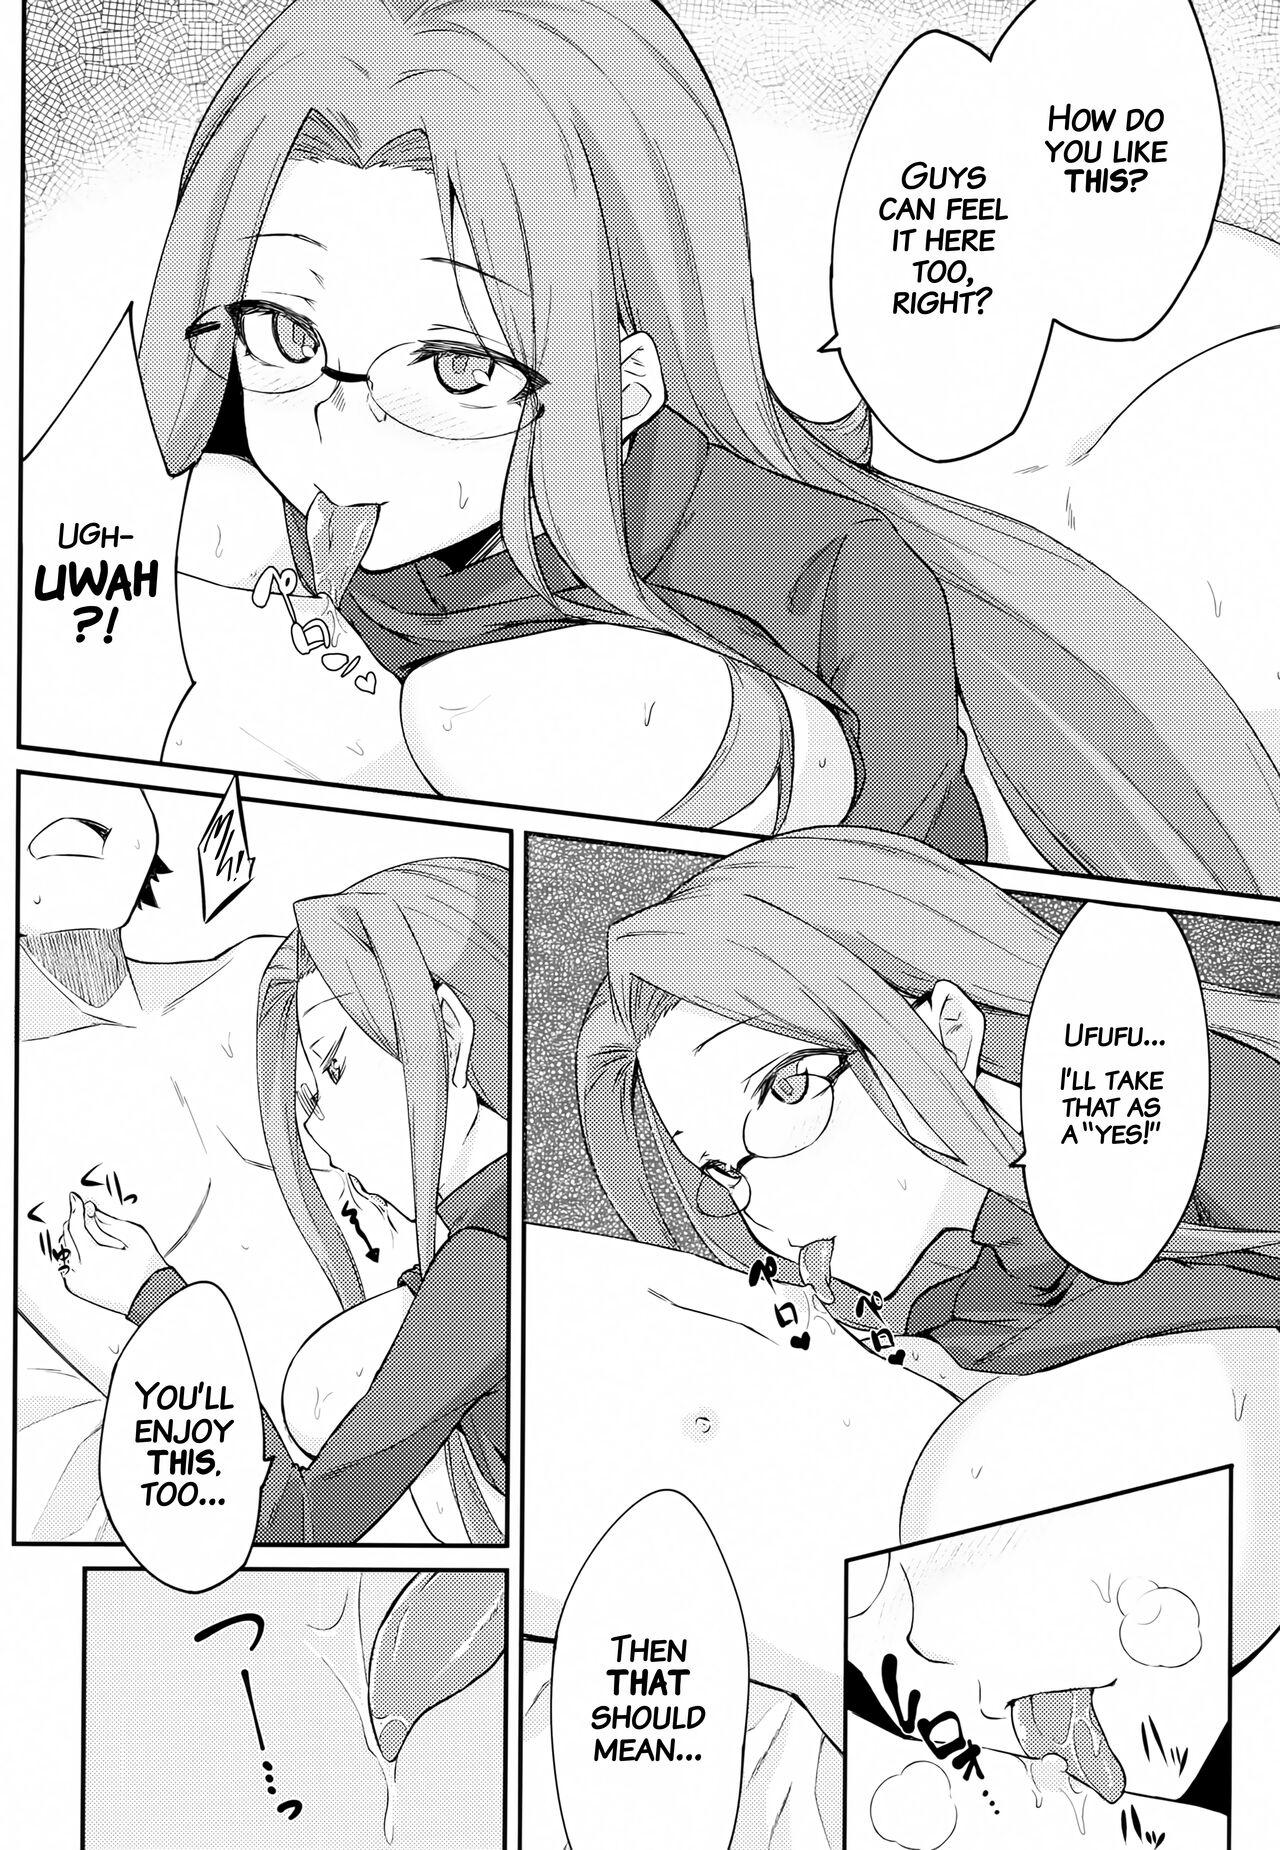 Gay Cut R15 - Fate stay night Lovers - Page 9